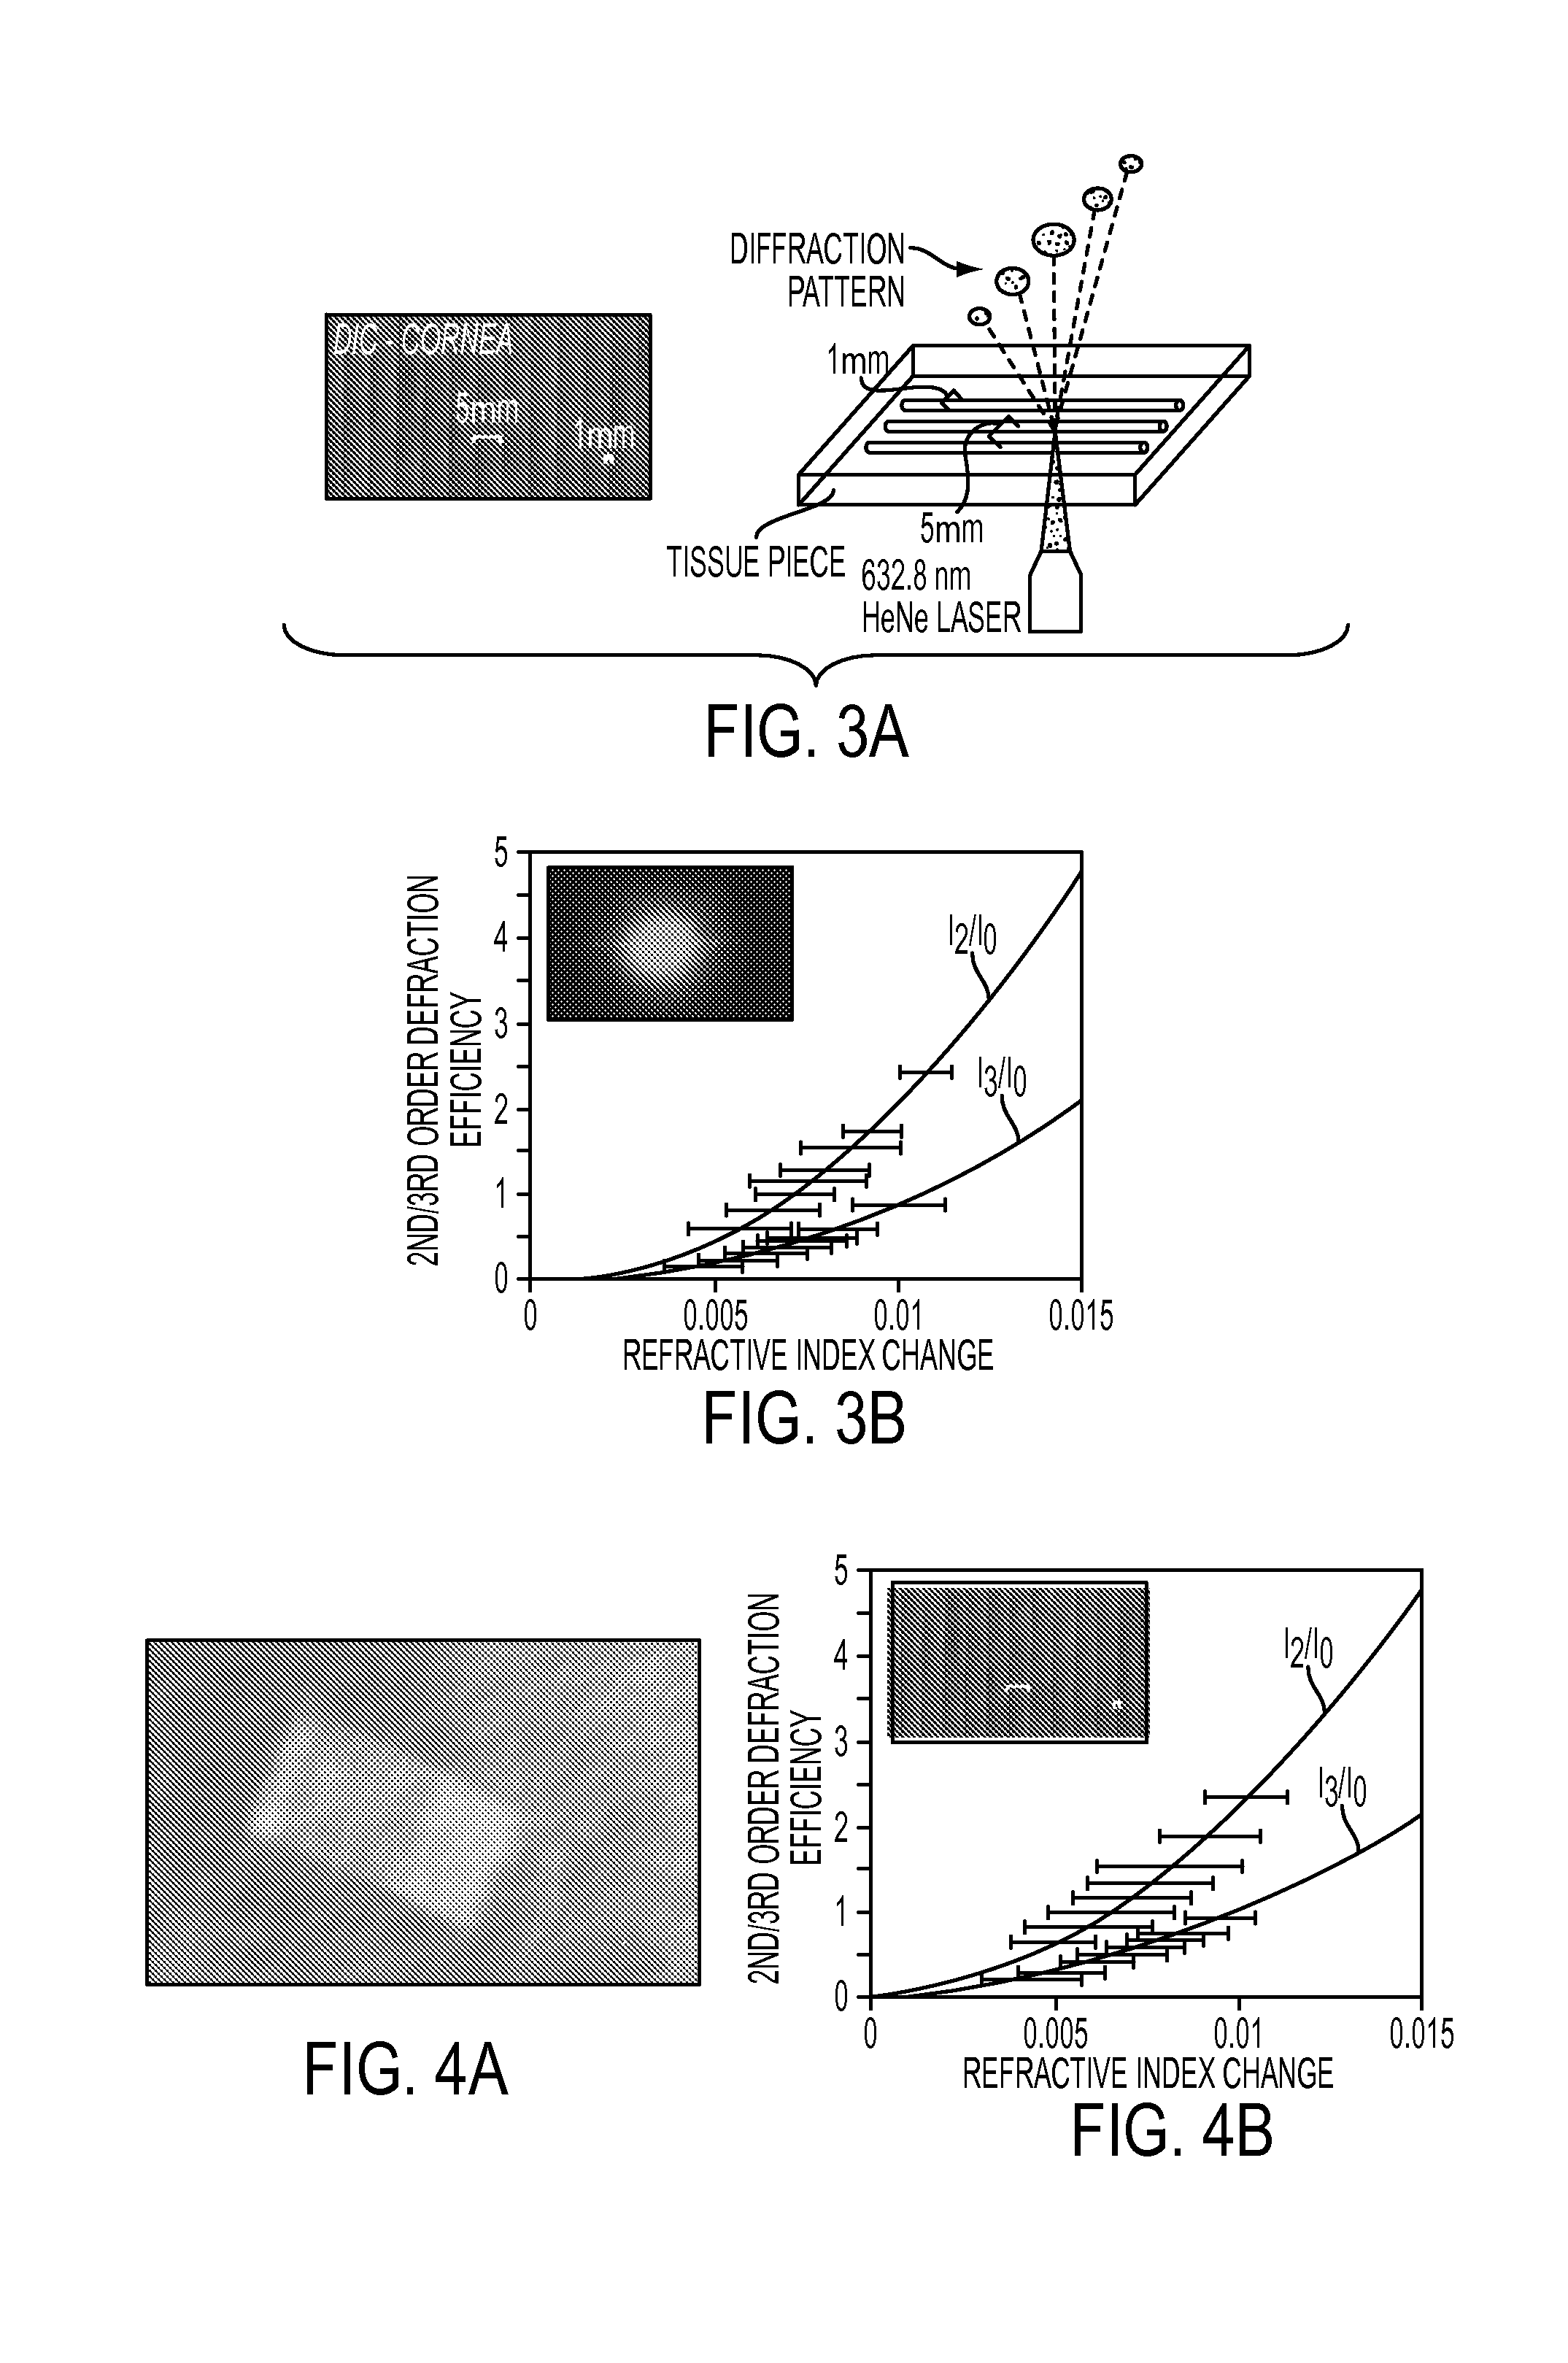 Multi-photon absorption for femtosecond micromachining and refractive index modification of tissues